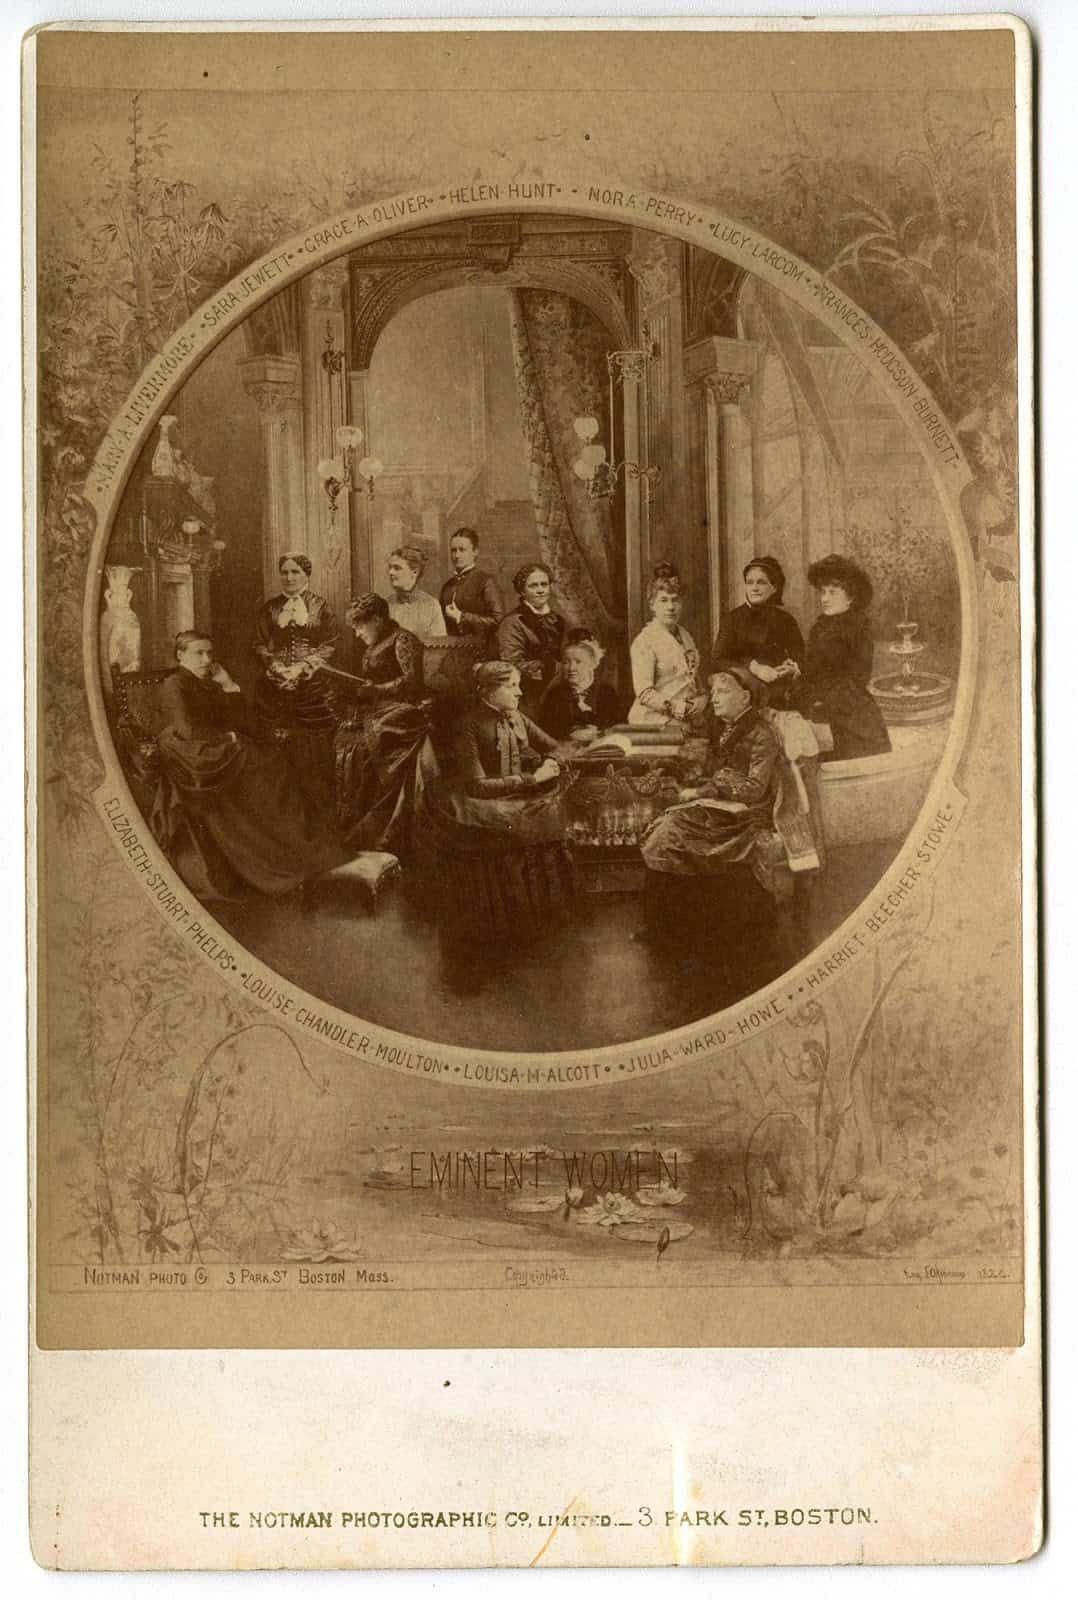 A manipulated photograph depicting twelve women writers seated together. "Eminent Women," P.2016.73